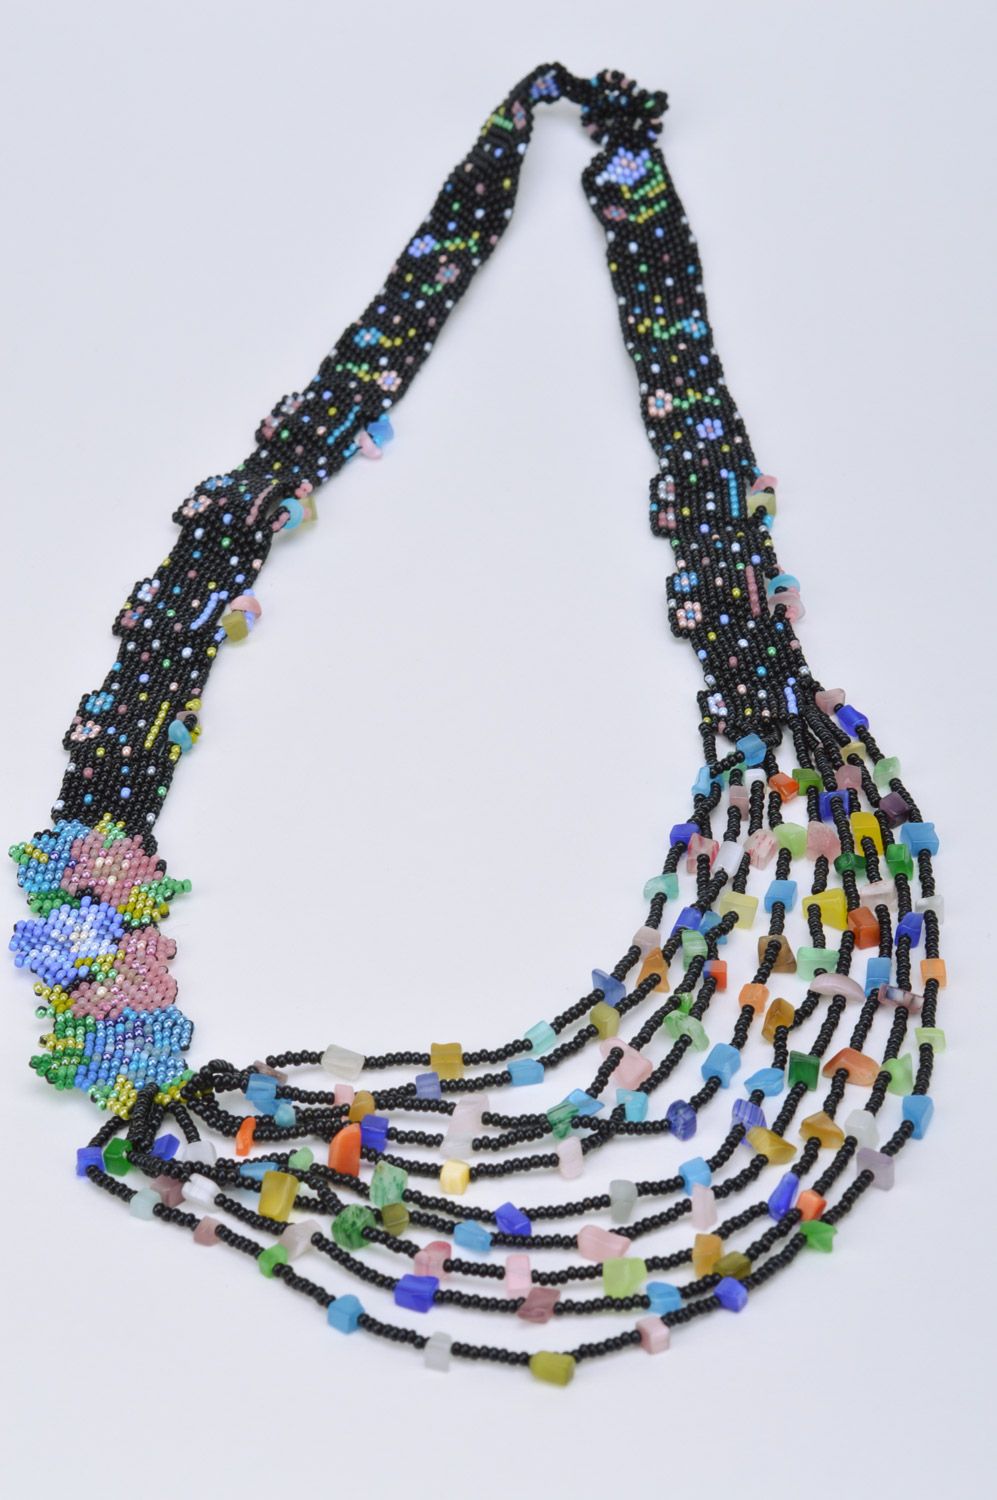 Handmade multi row necklace woven of colorful Czech beads and cat's eye stone photo 2